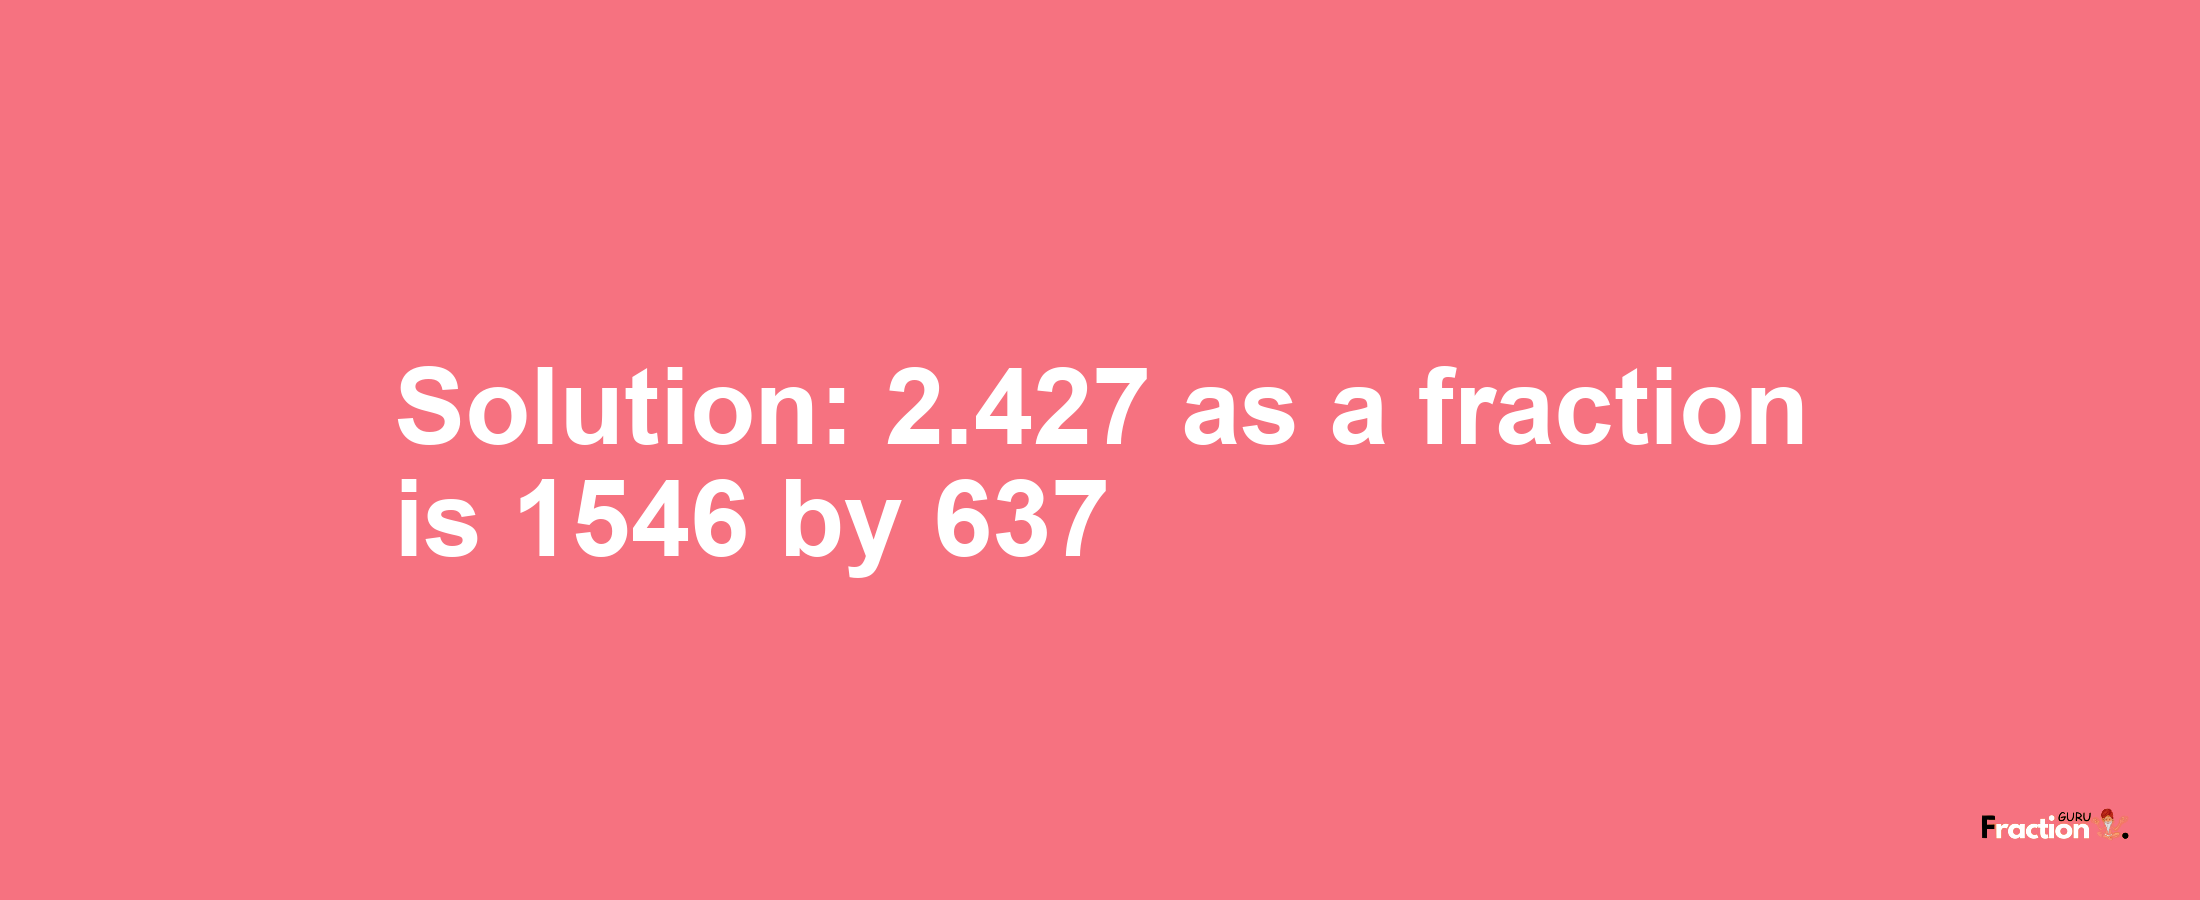 Solution:2.427 as a fraction is 1546/637